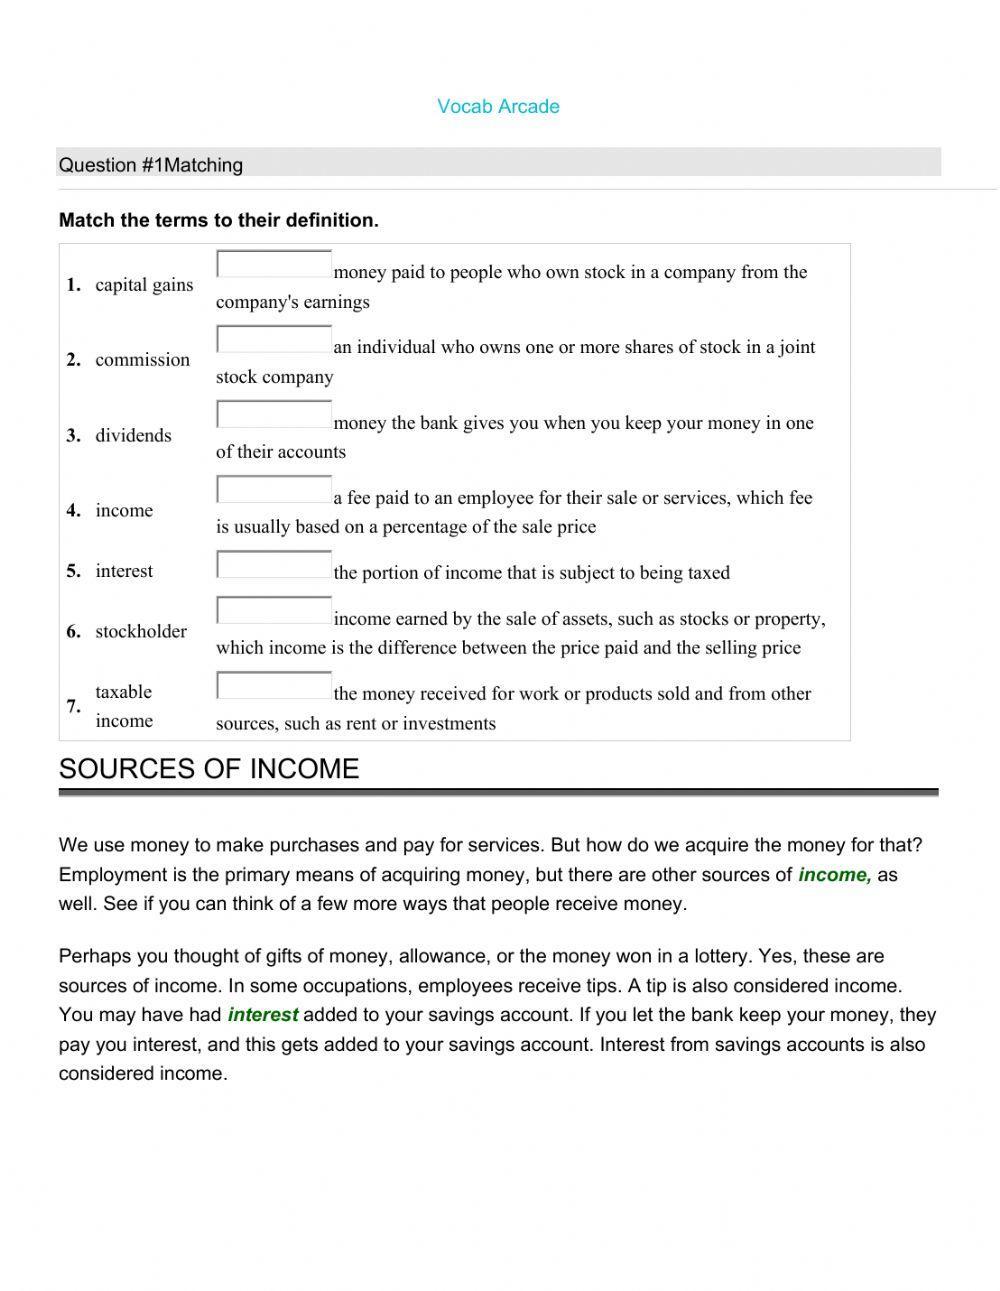 Sources of Income Worksheet